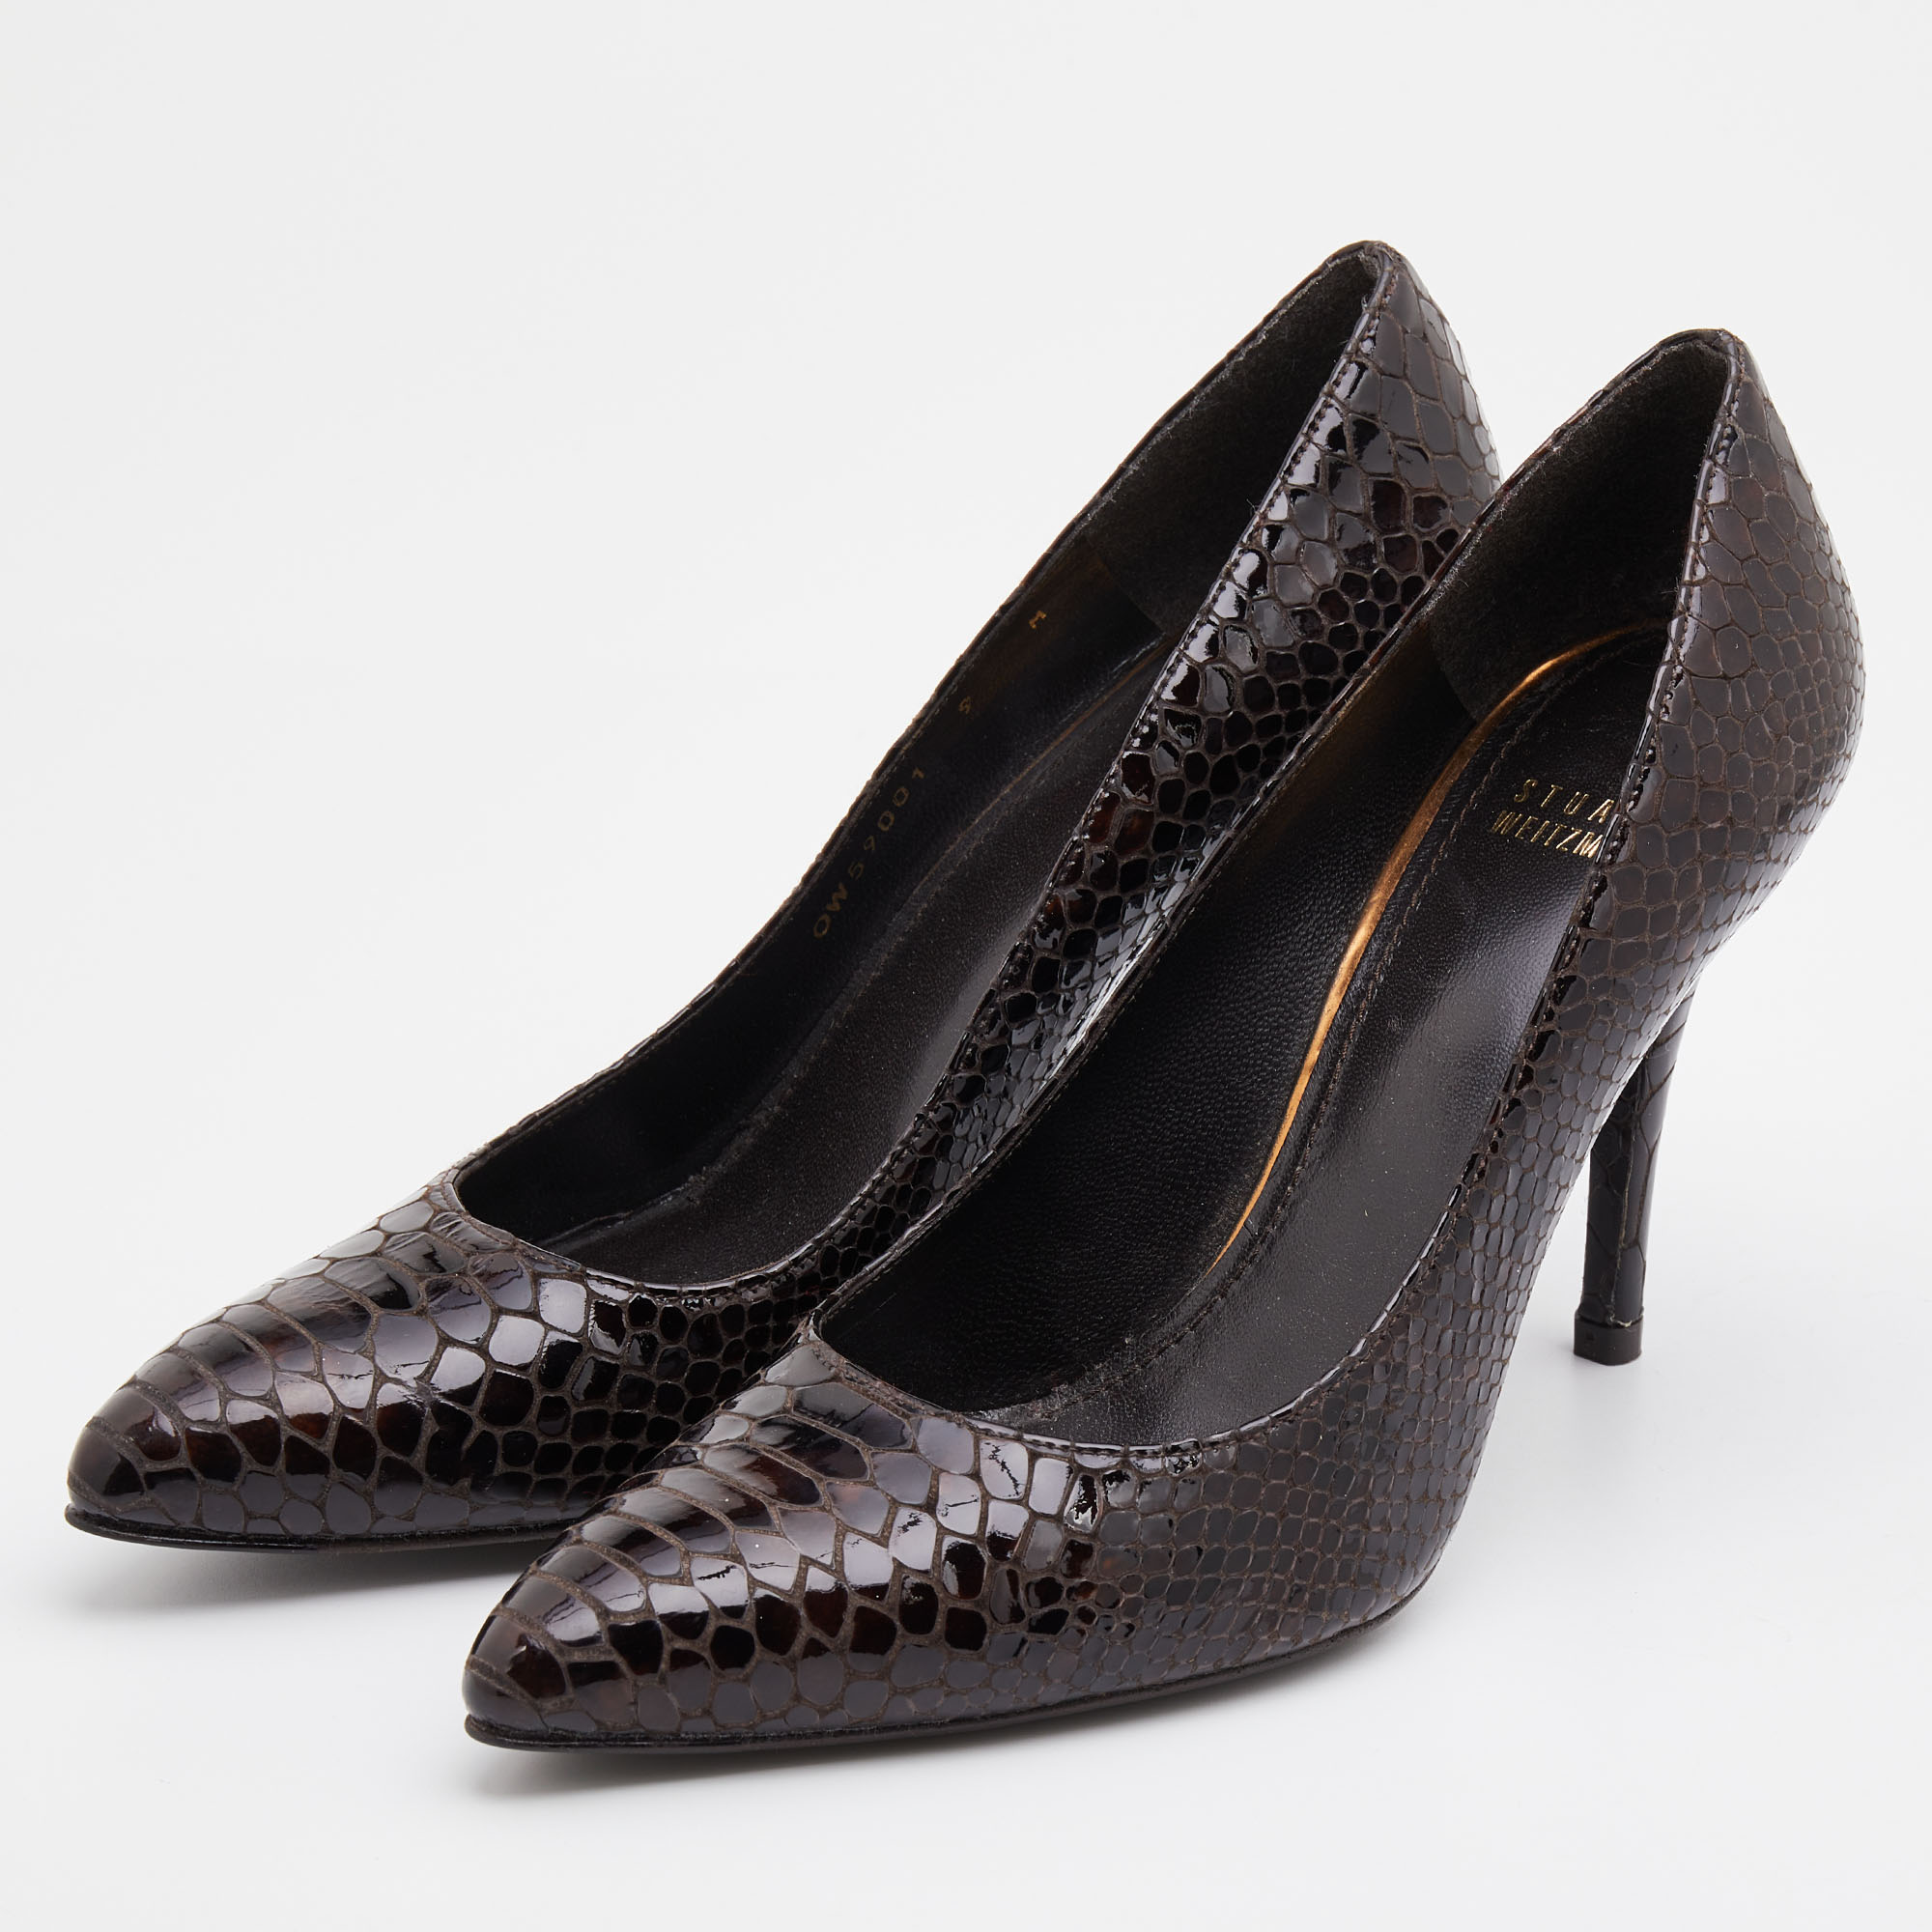 

Stuart Weitzman Dark Brown Python Embossed Patent Leather Pointed Toe Pumps Size